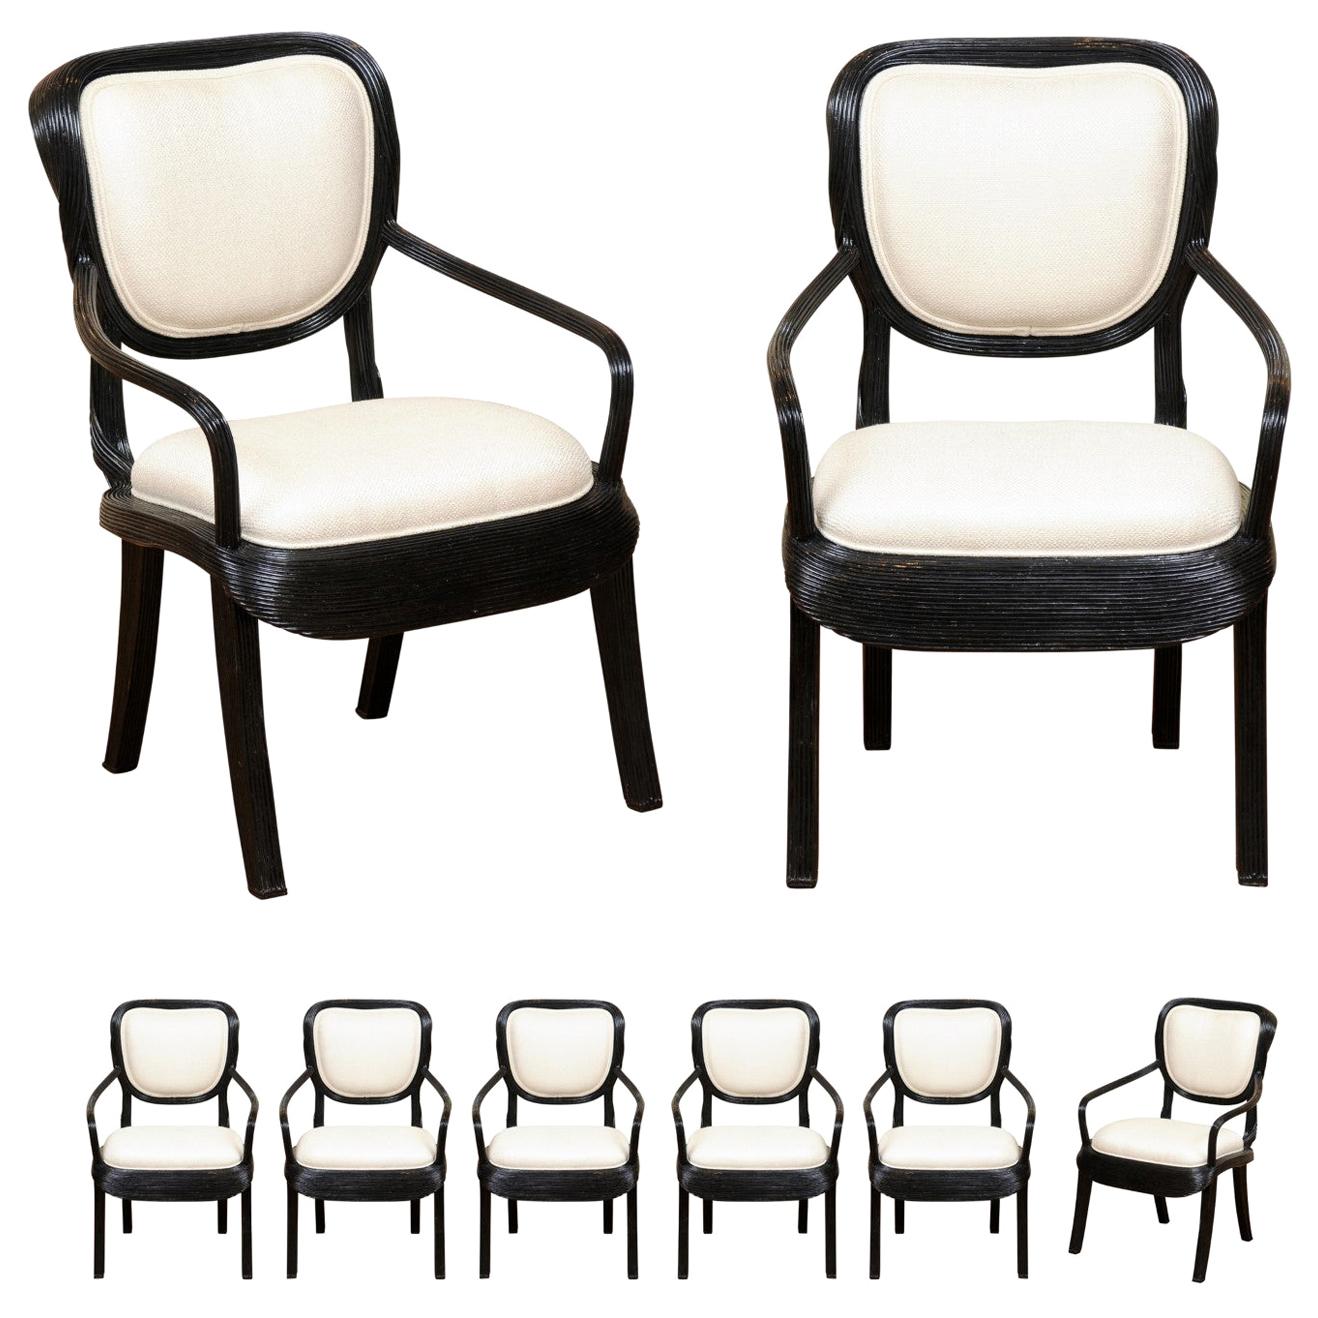 Extraordinary Set of 8 Trompe L'oiel Dining Chairs by Betty Cobonpue, circa 1980 For Sale